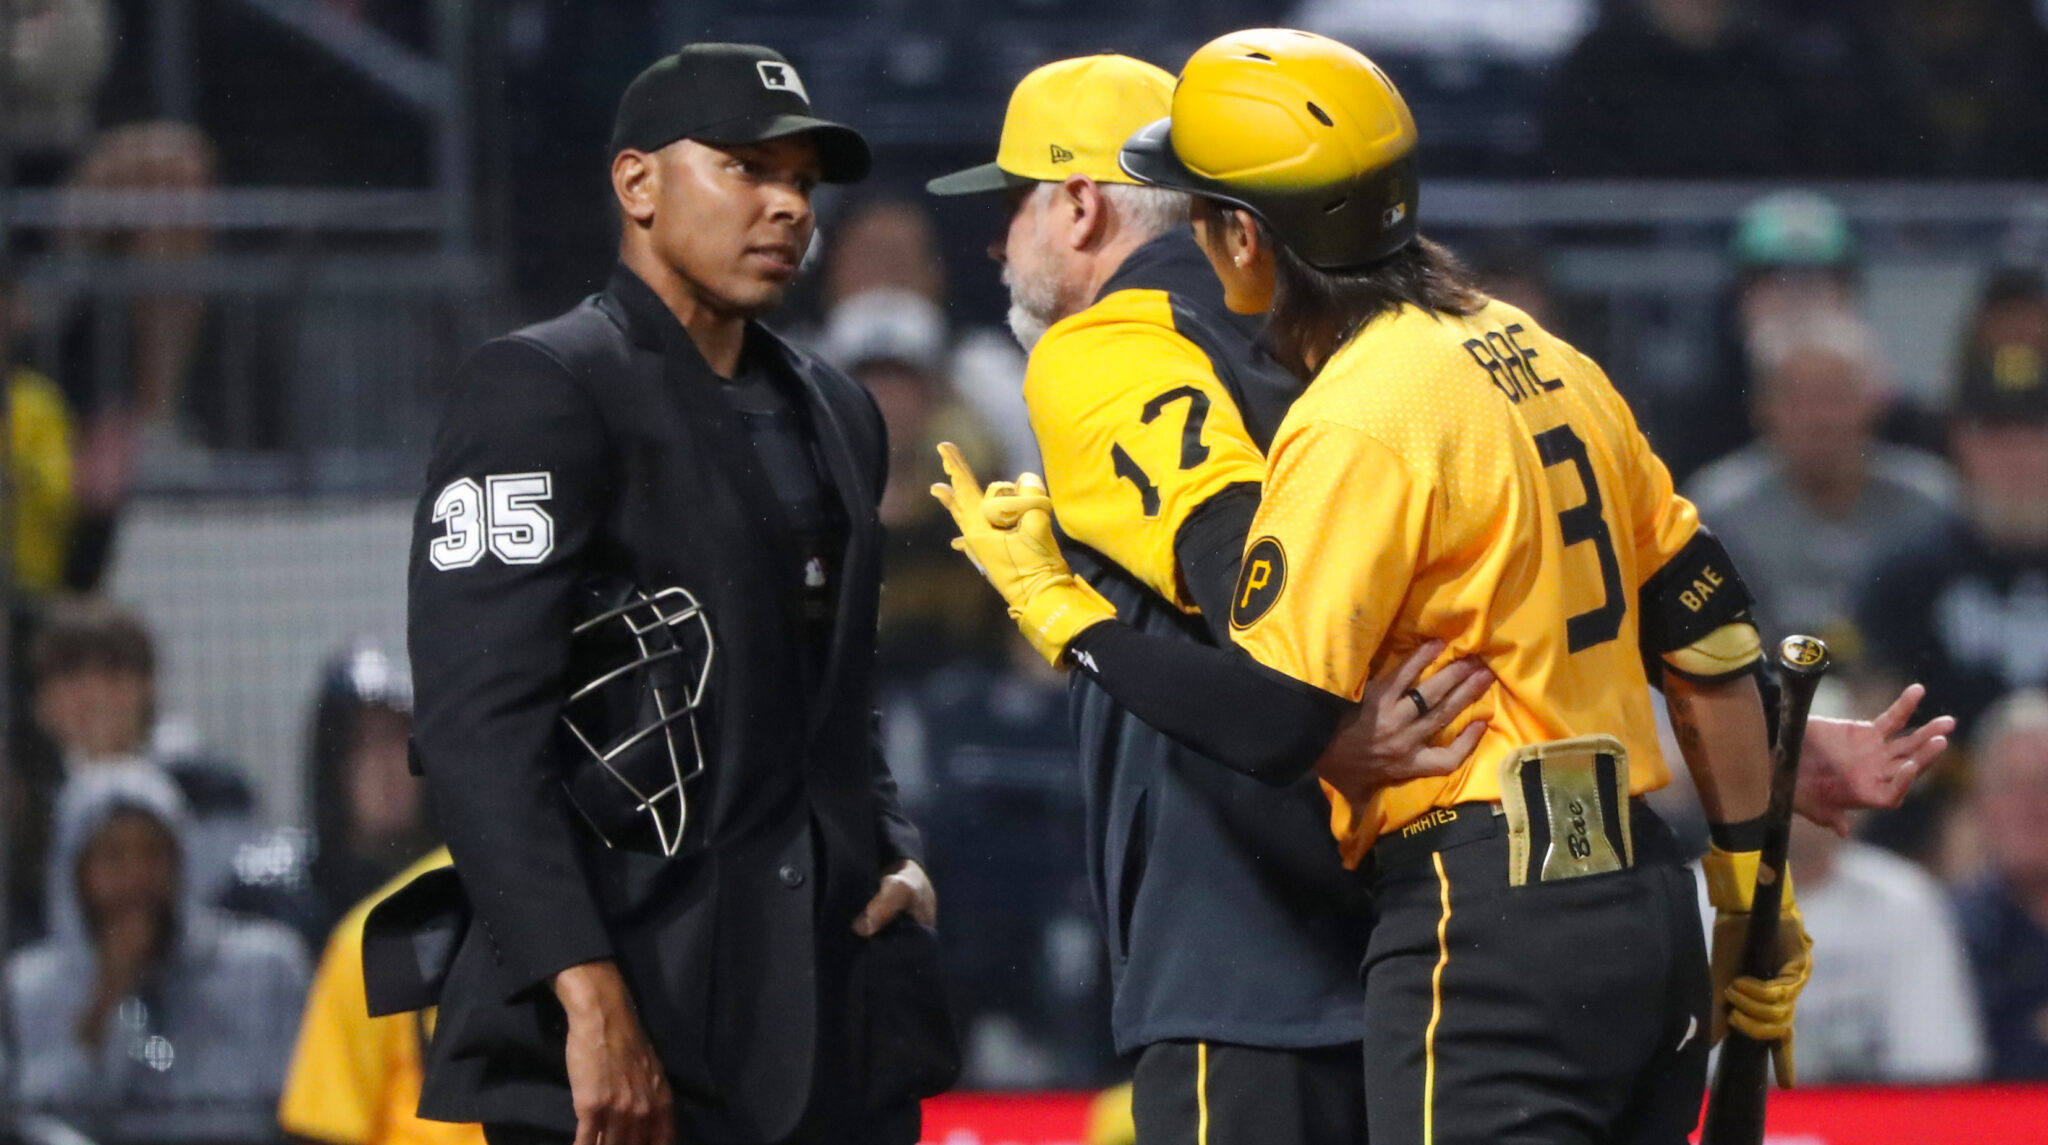 Pittsburgh Pirates on X: We are saddened by the loss of Tim